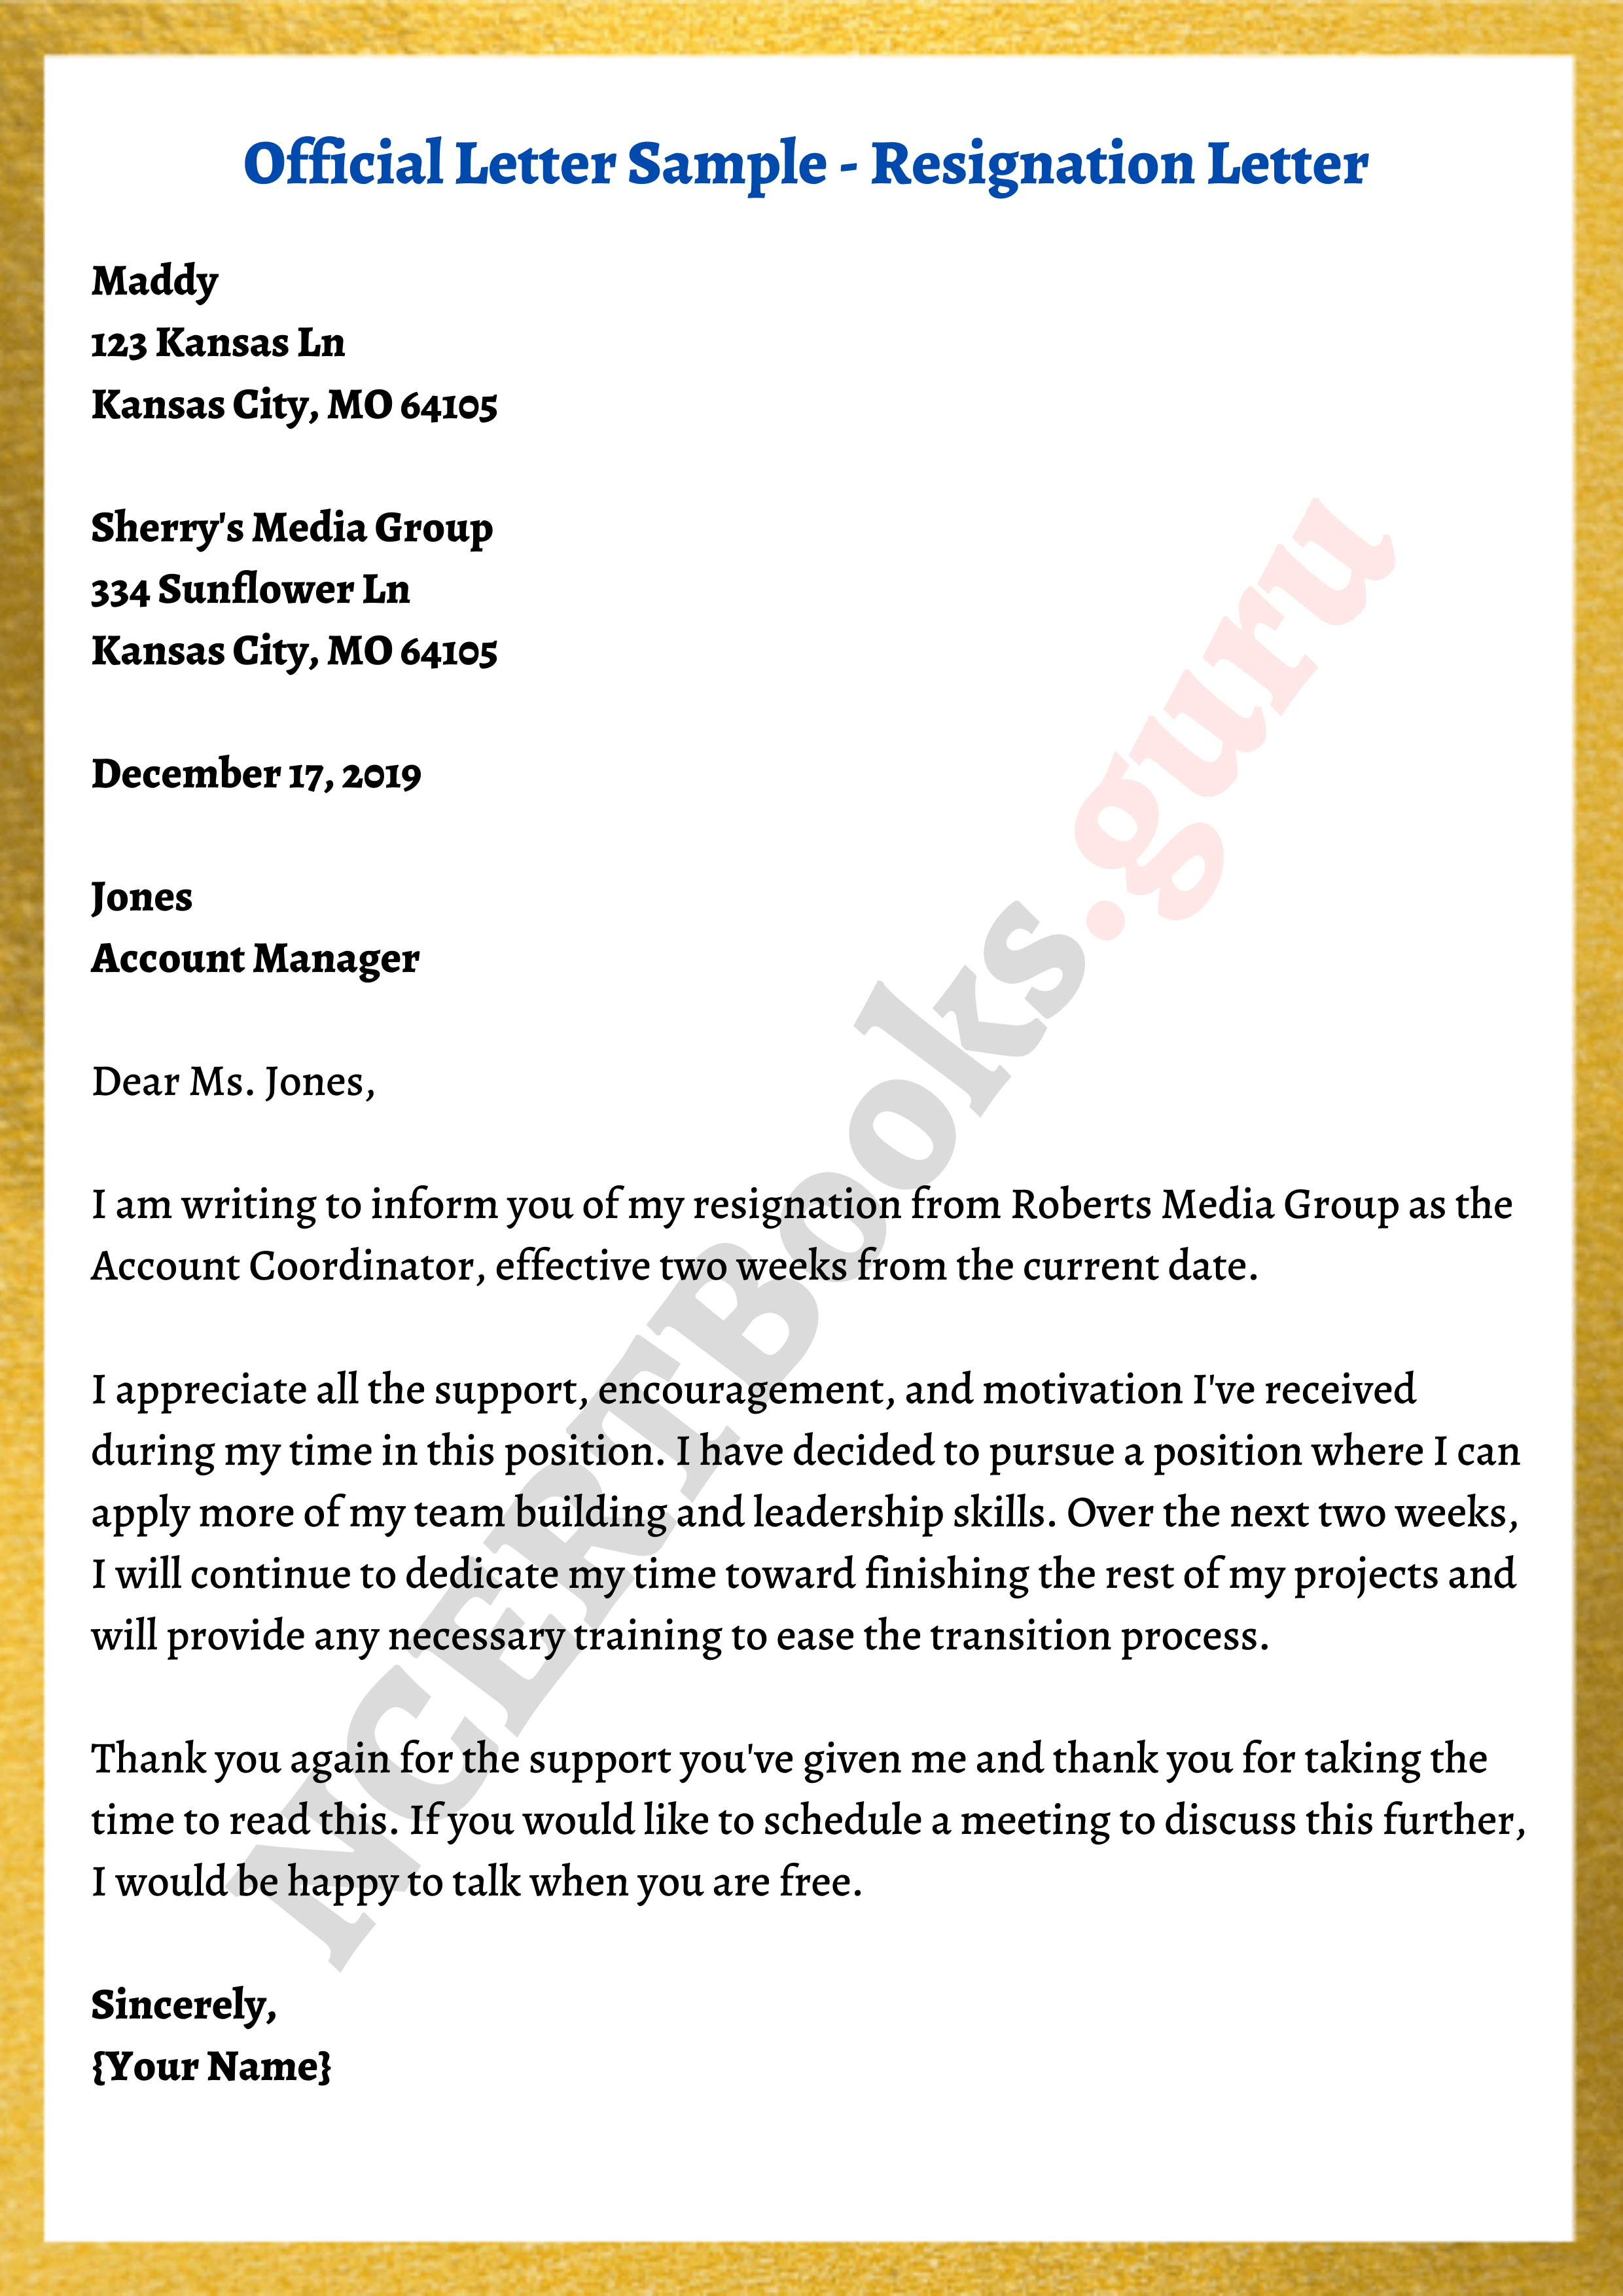 Official Letter Format and Samples | How to Write a Formal Official Letter?